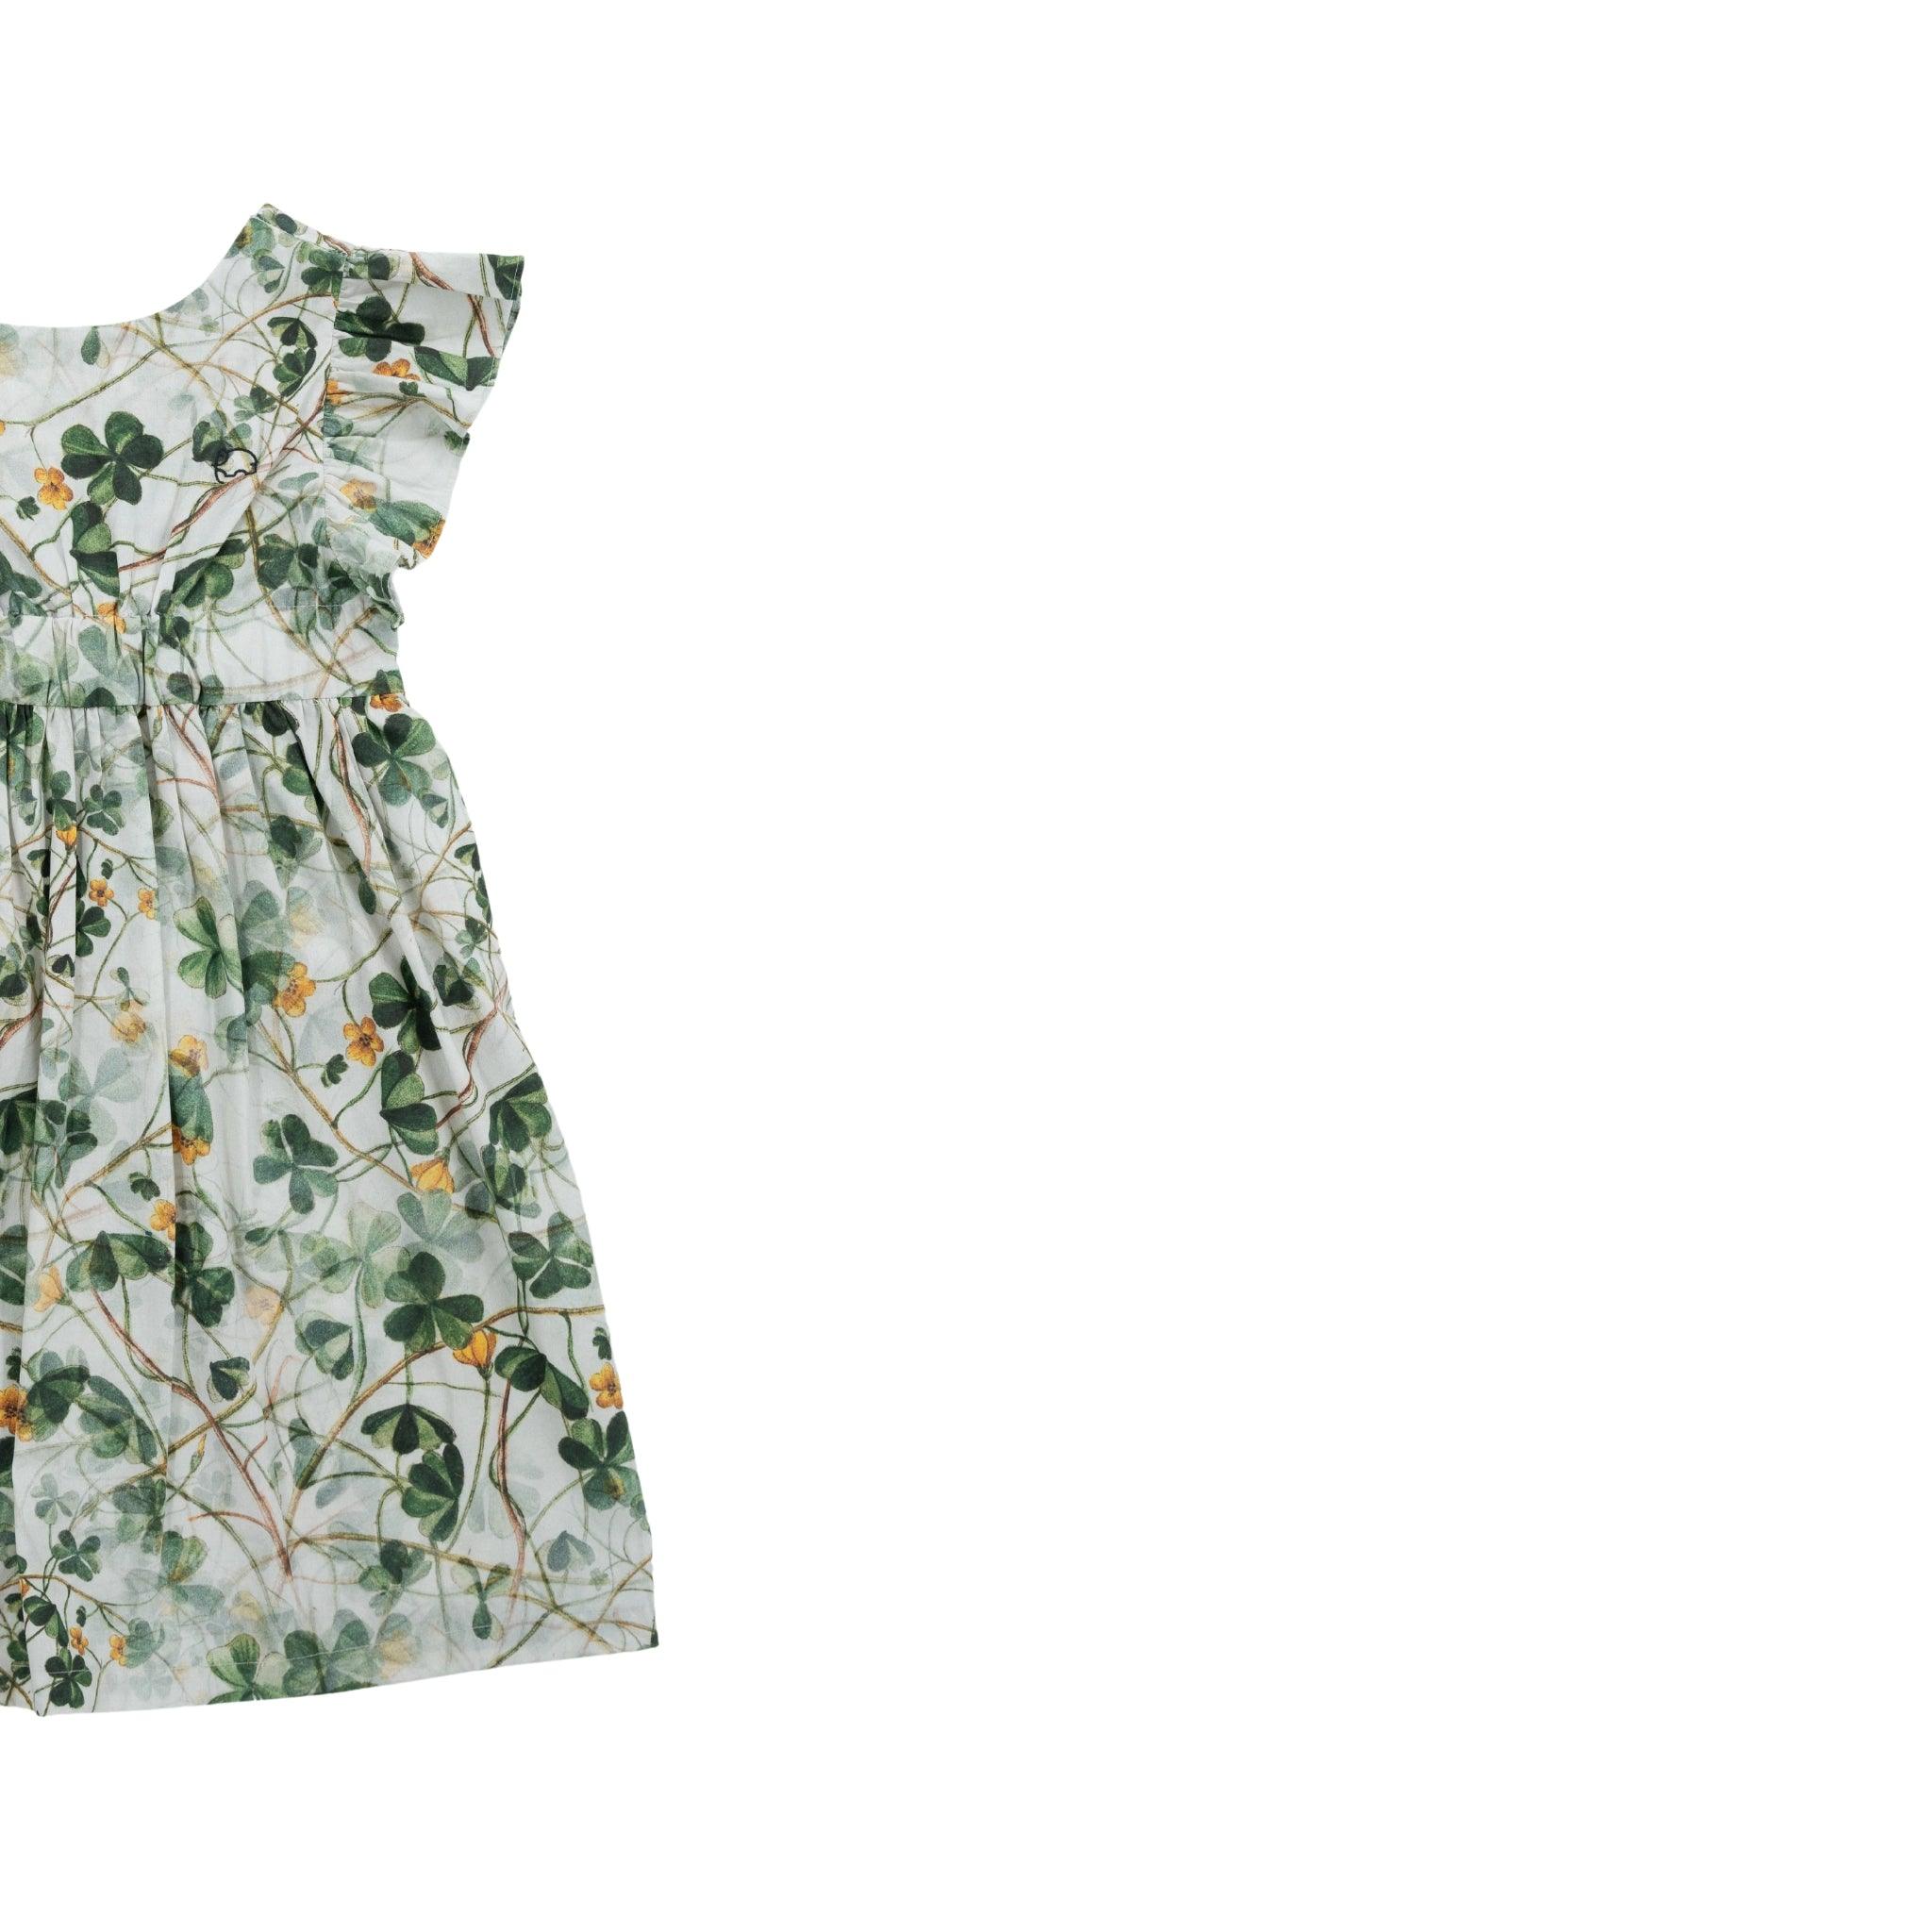 A Karee green floral patterned cotton dress for girls with a ruffled skirt and short sleeves, displayed on a plain white background.